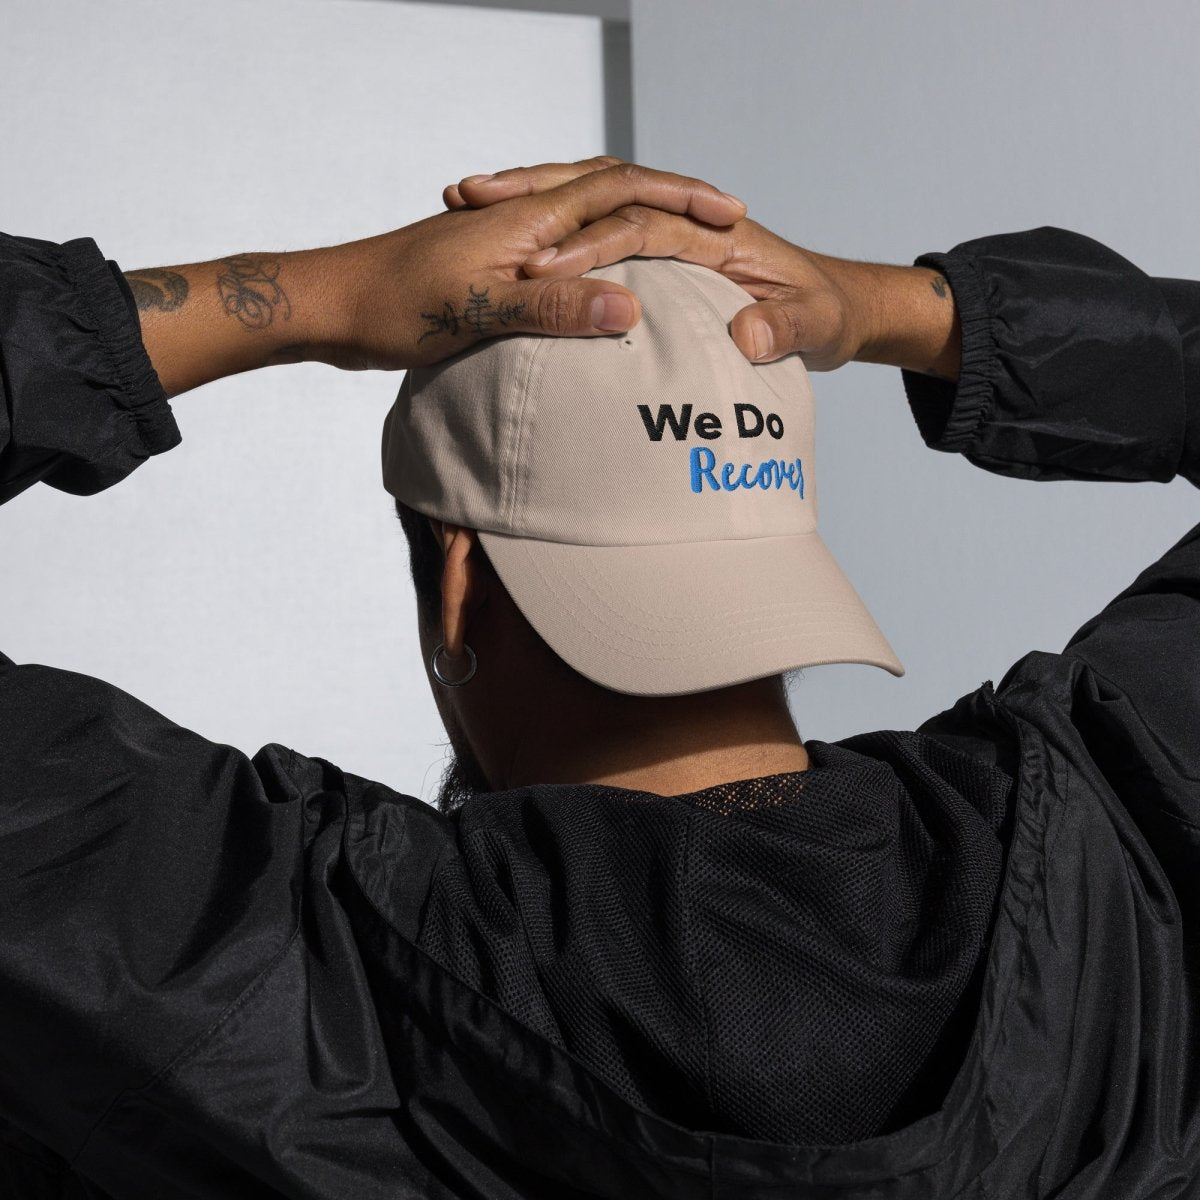 We Do Recover Dad Hat: Celebrate Sobriety and Empower Your Community with Fashion (Light Colors) - Sobervation